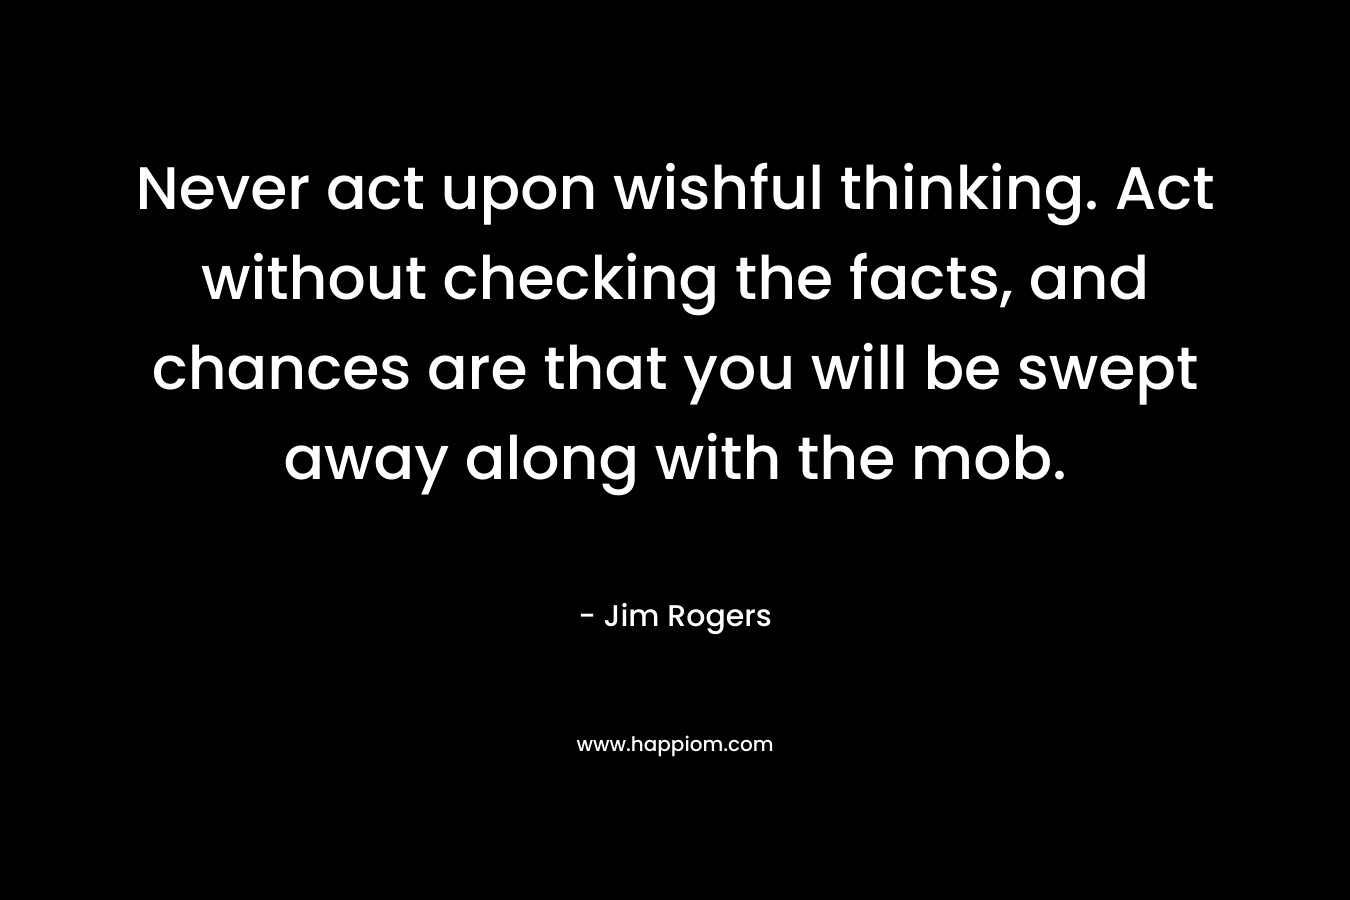 Never act upon wishful thinking. Act without checking the facts, and chances are that you will be swept away along with the mob.